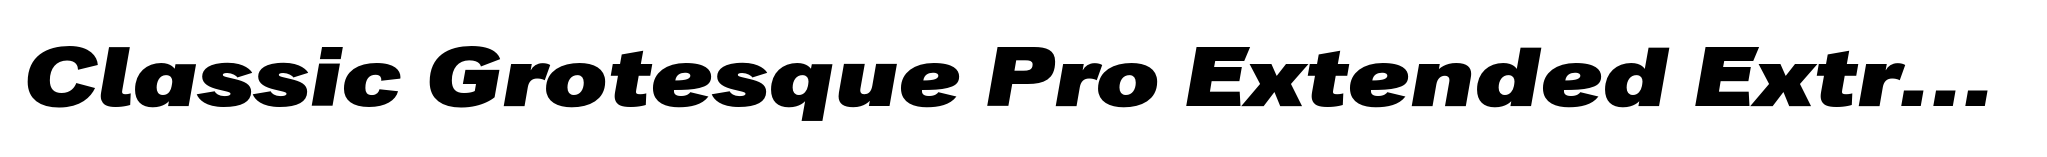 Classic Grotesque Pro Extended Extra Bold Italic image